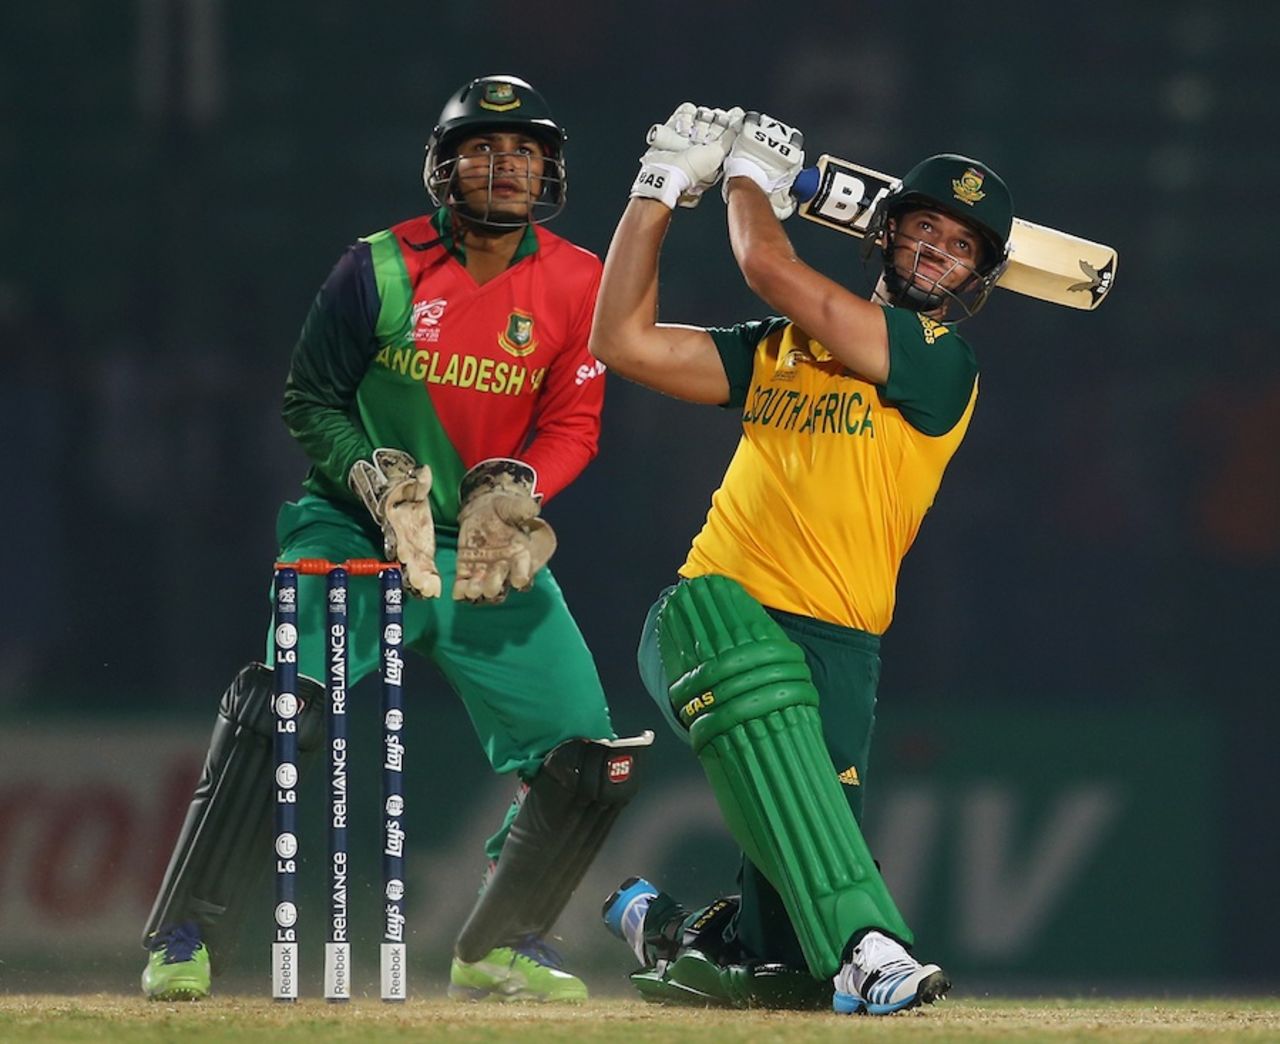 Albie Morkel clouted 27 off 12 balls, Bangladesh A v South Africans, World T20 warm-ups, Fatullah, March 18, 2014